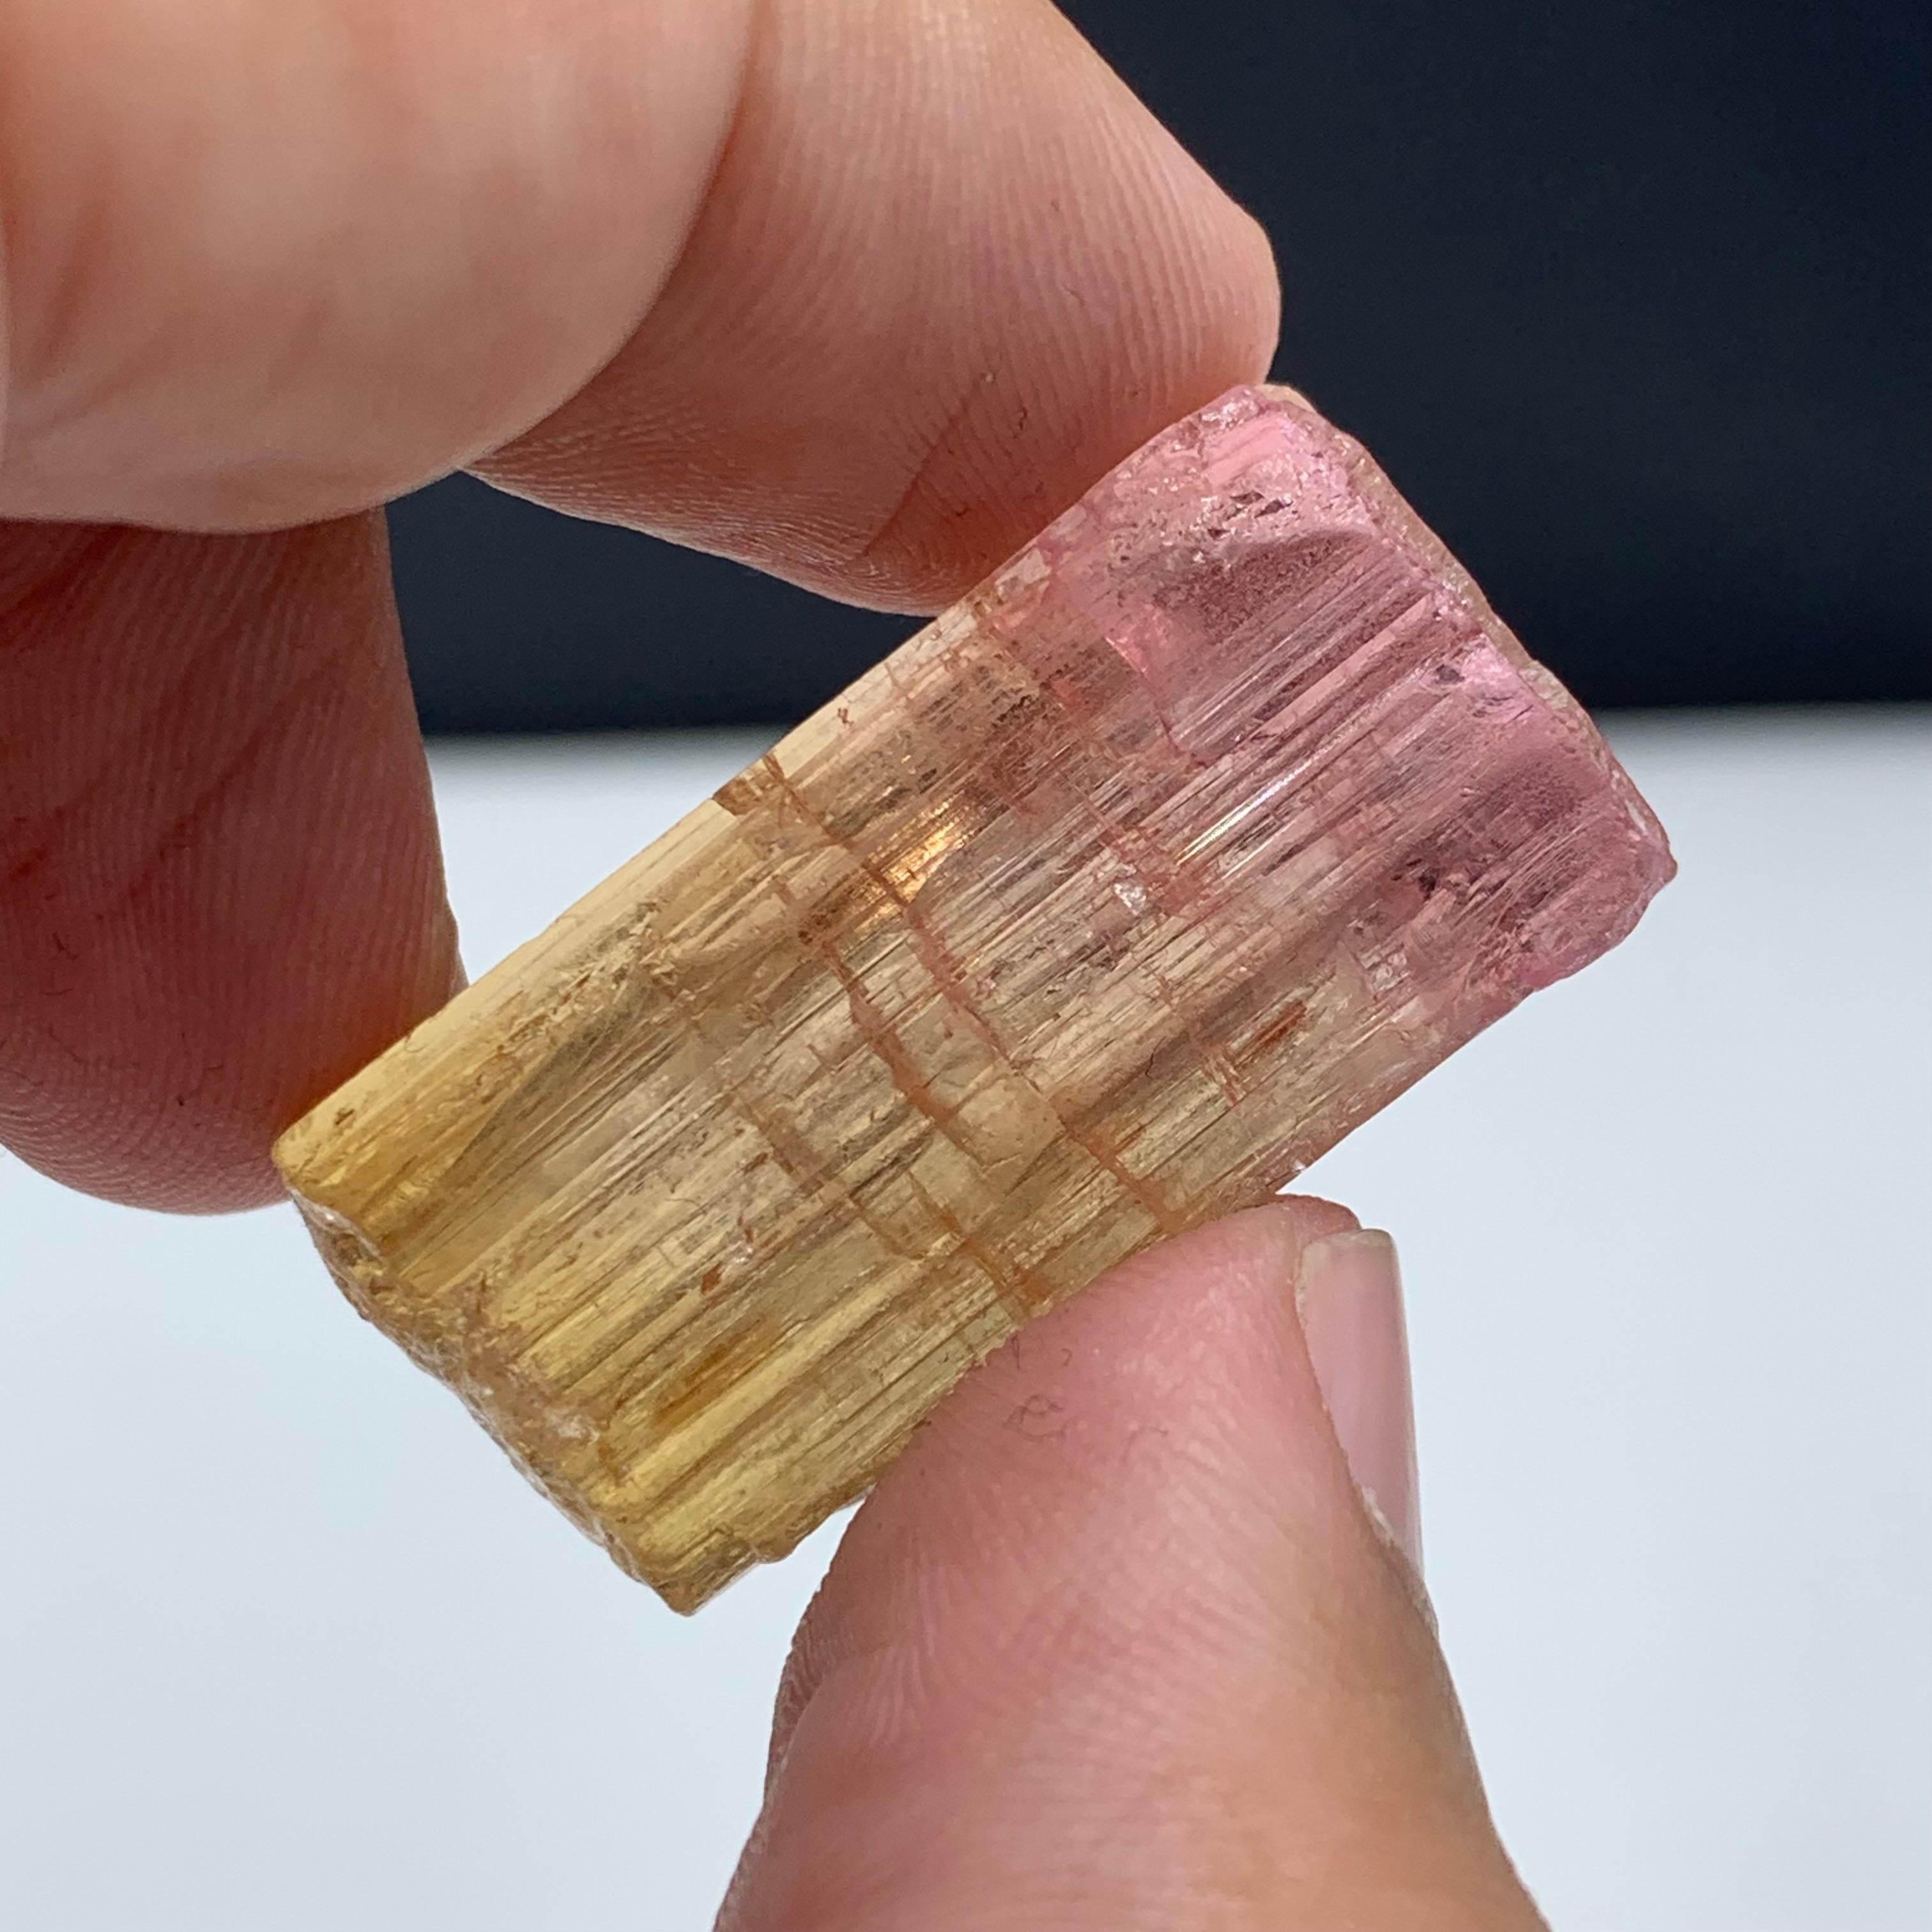 48 Carat Amazing Bi Color Tourmaline Crystal From Paprook Mine, Afghanistan For Sale 3